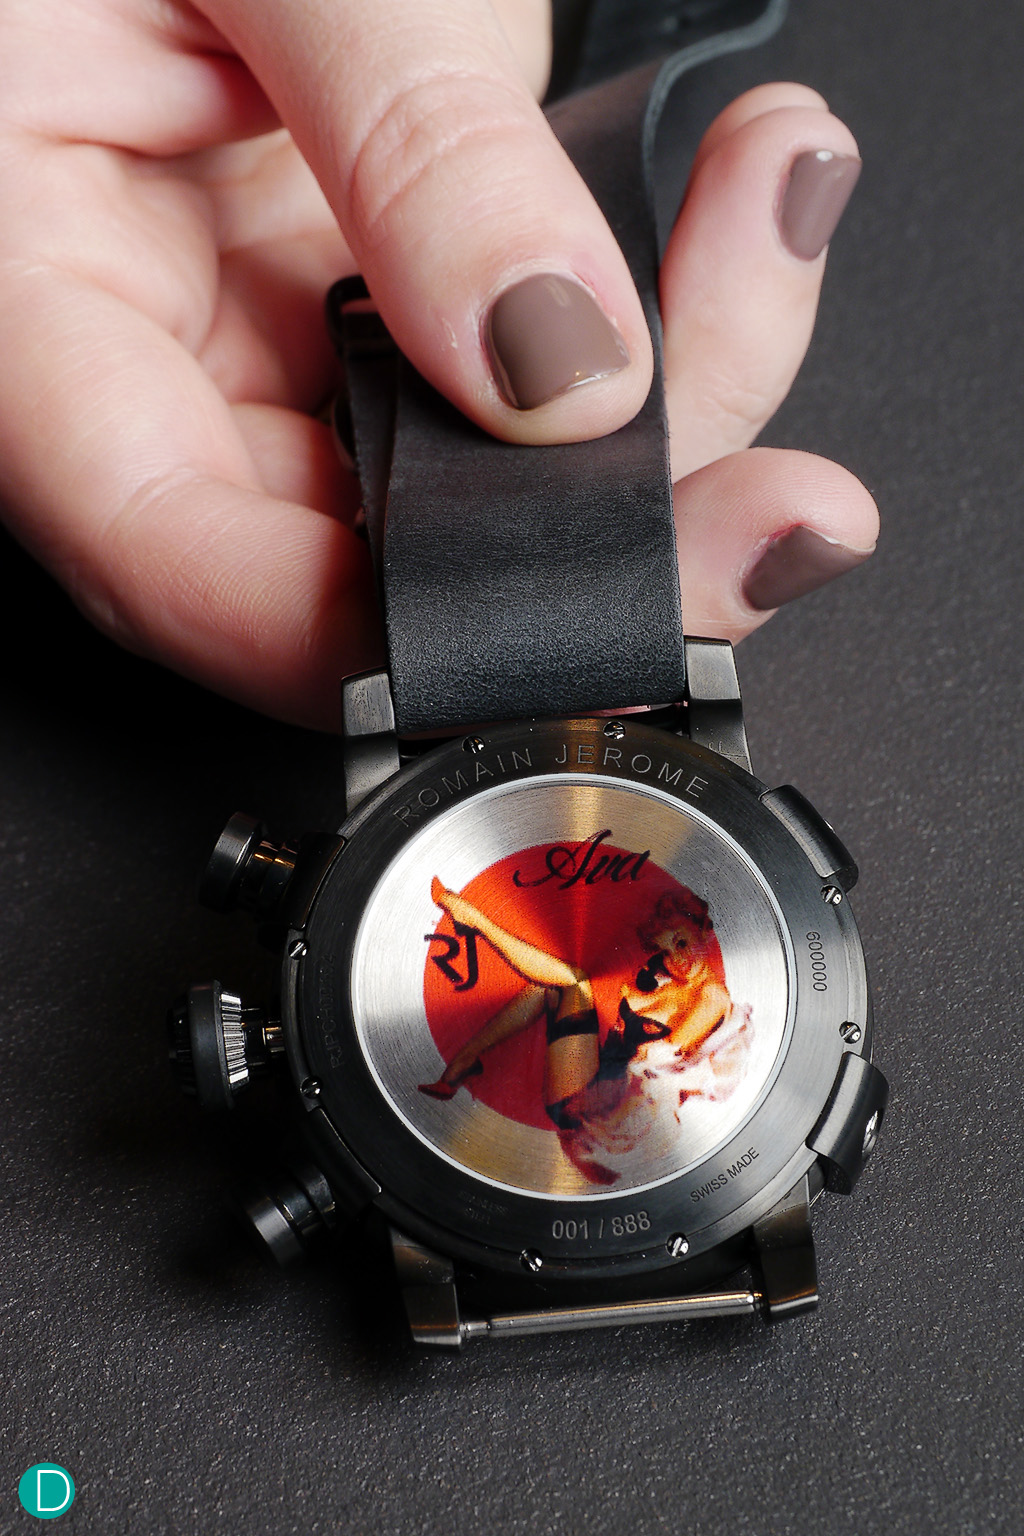 The caseback of the Romain Jerome Nose Art-DNA watch. Possibly one of the highlights of this timepiece itself.